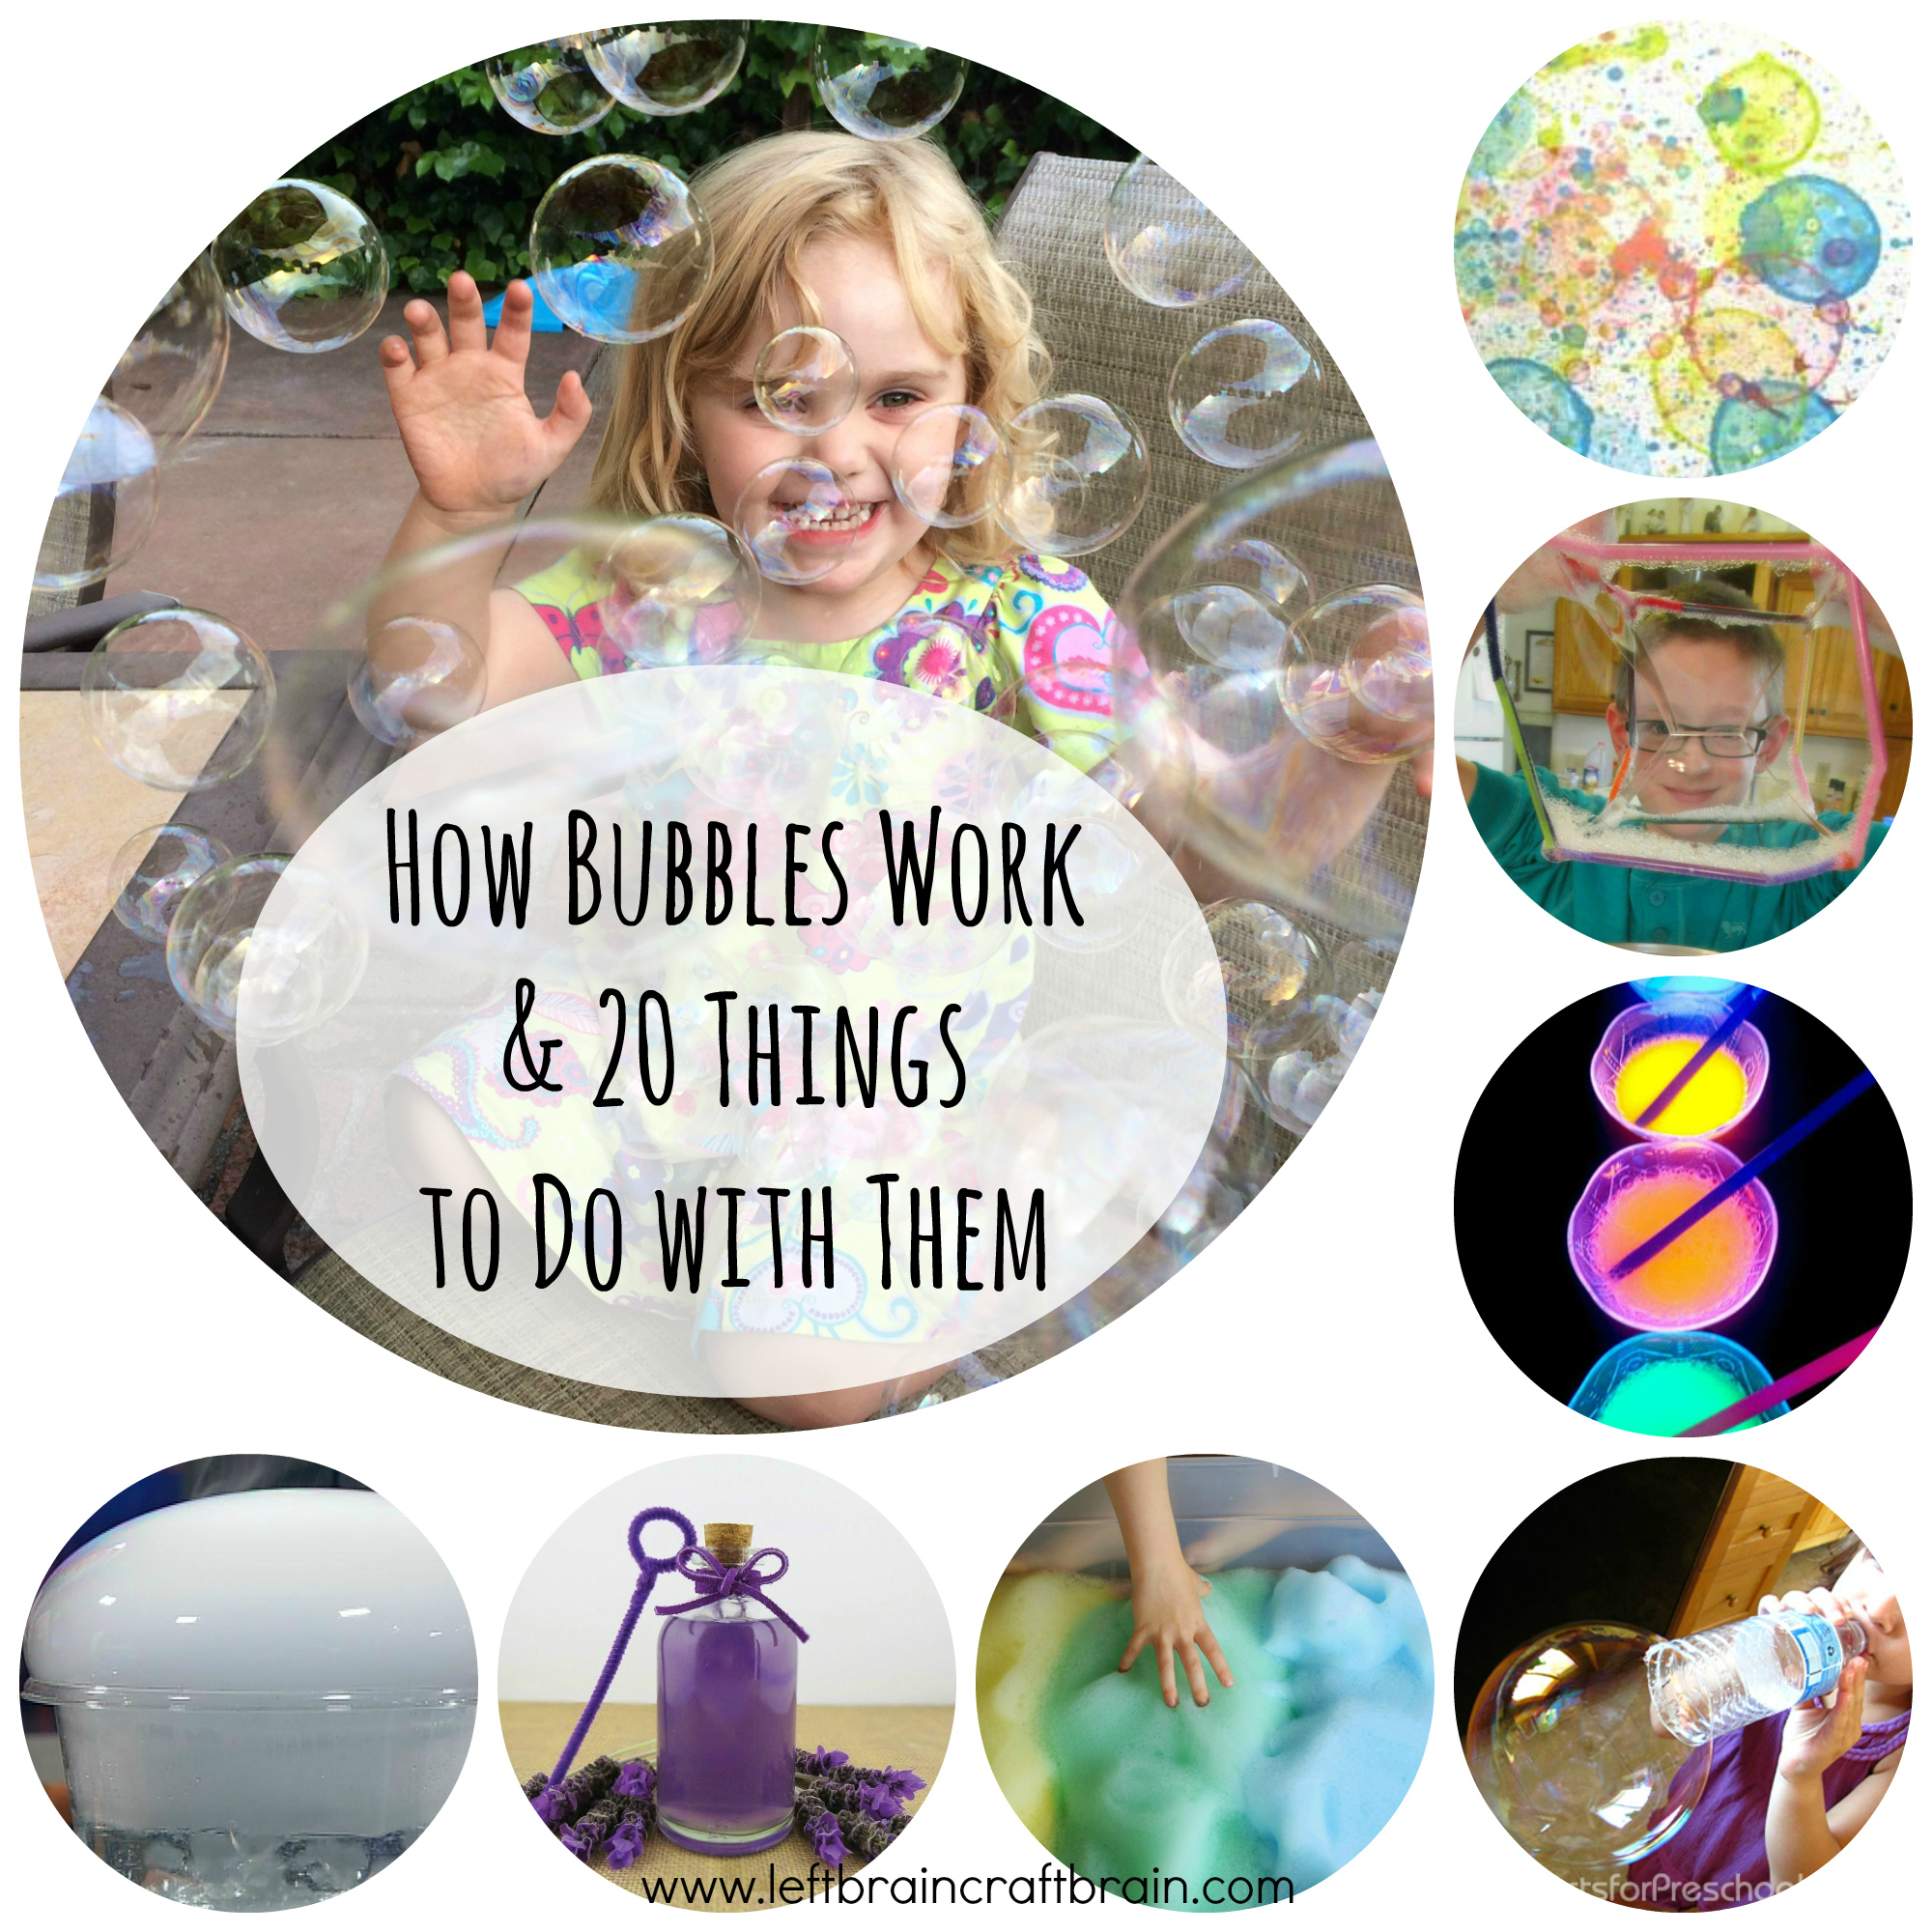 How Bubbles Work and 20 Things to Do With Them 2